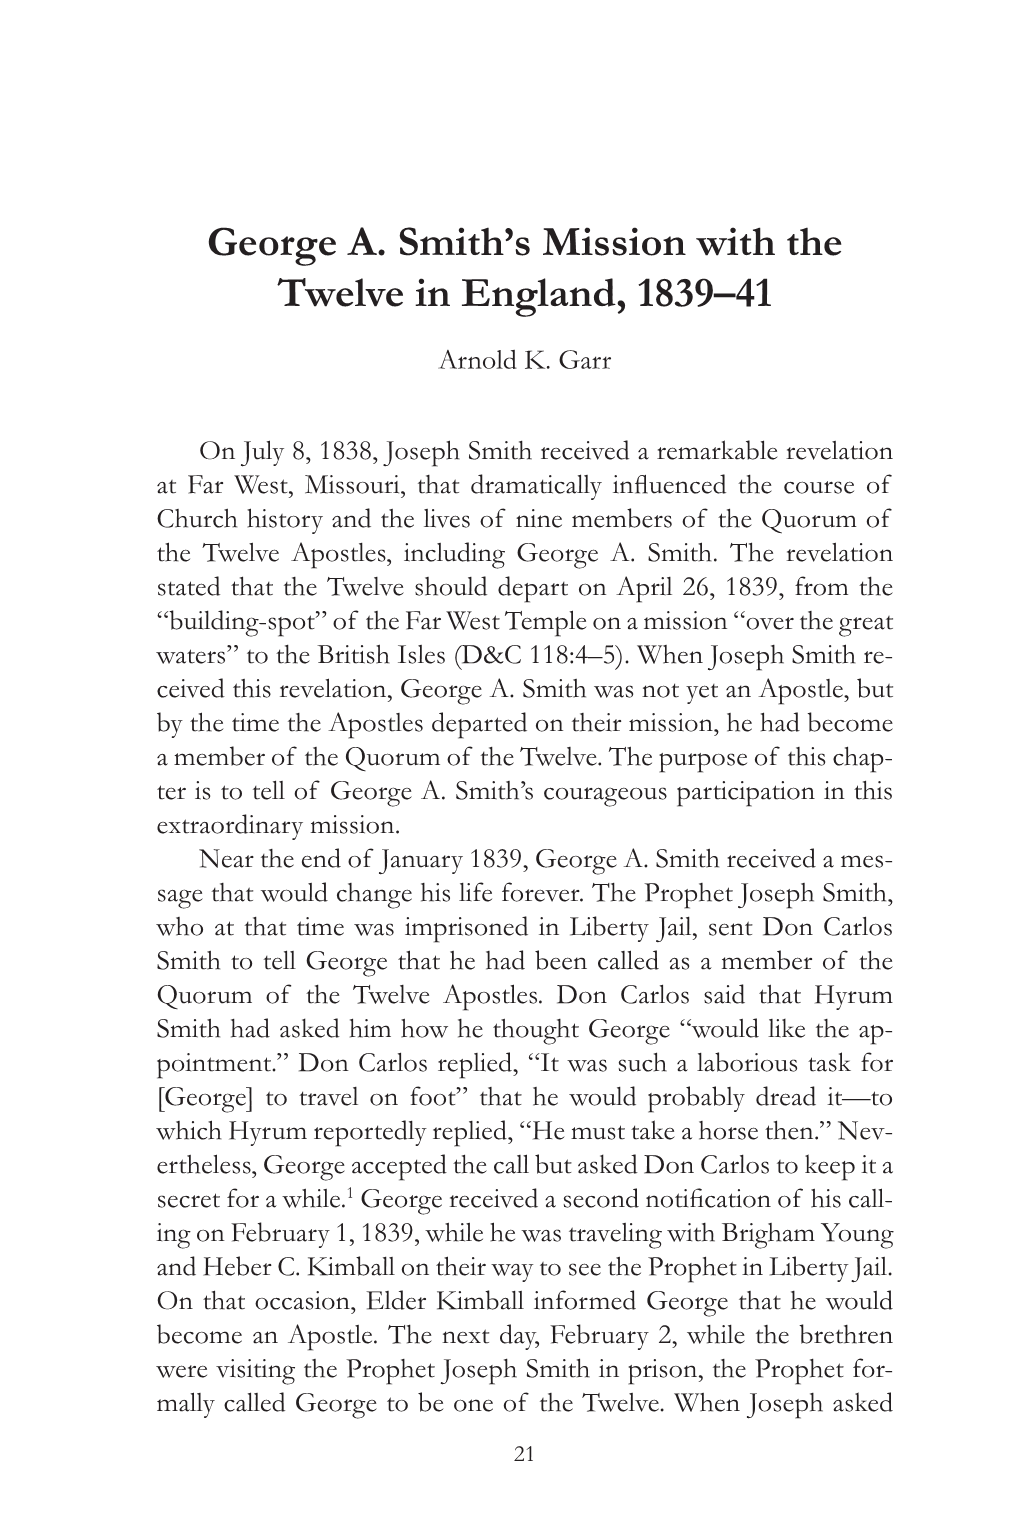 George A. Smith's Mission with the Twelve in England, 1839–41